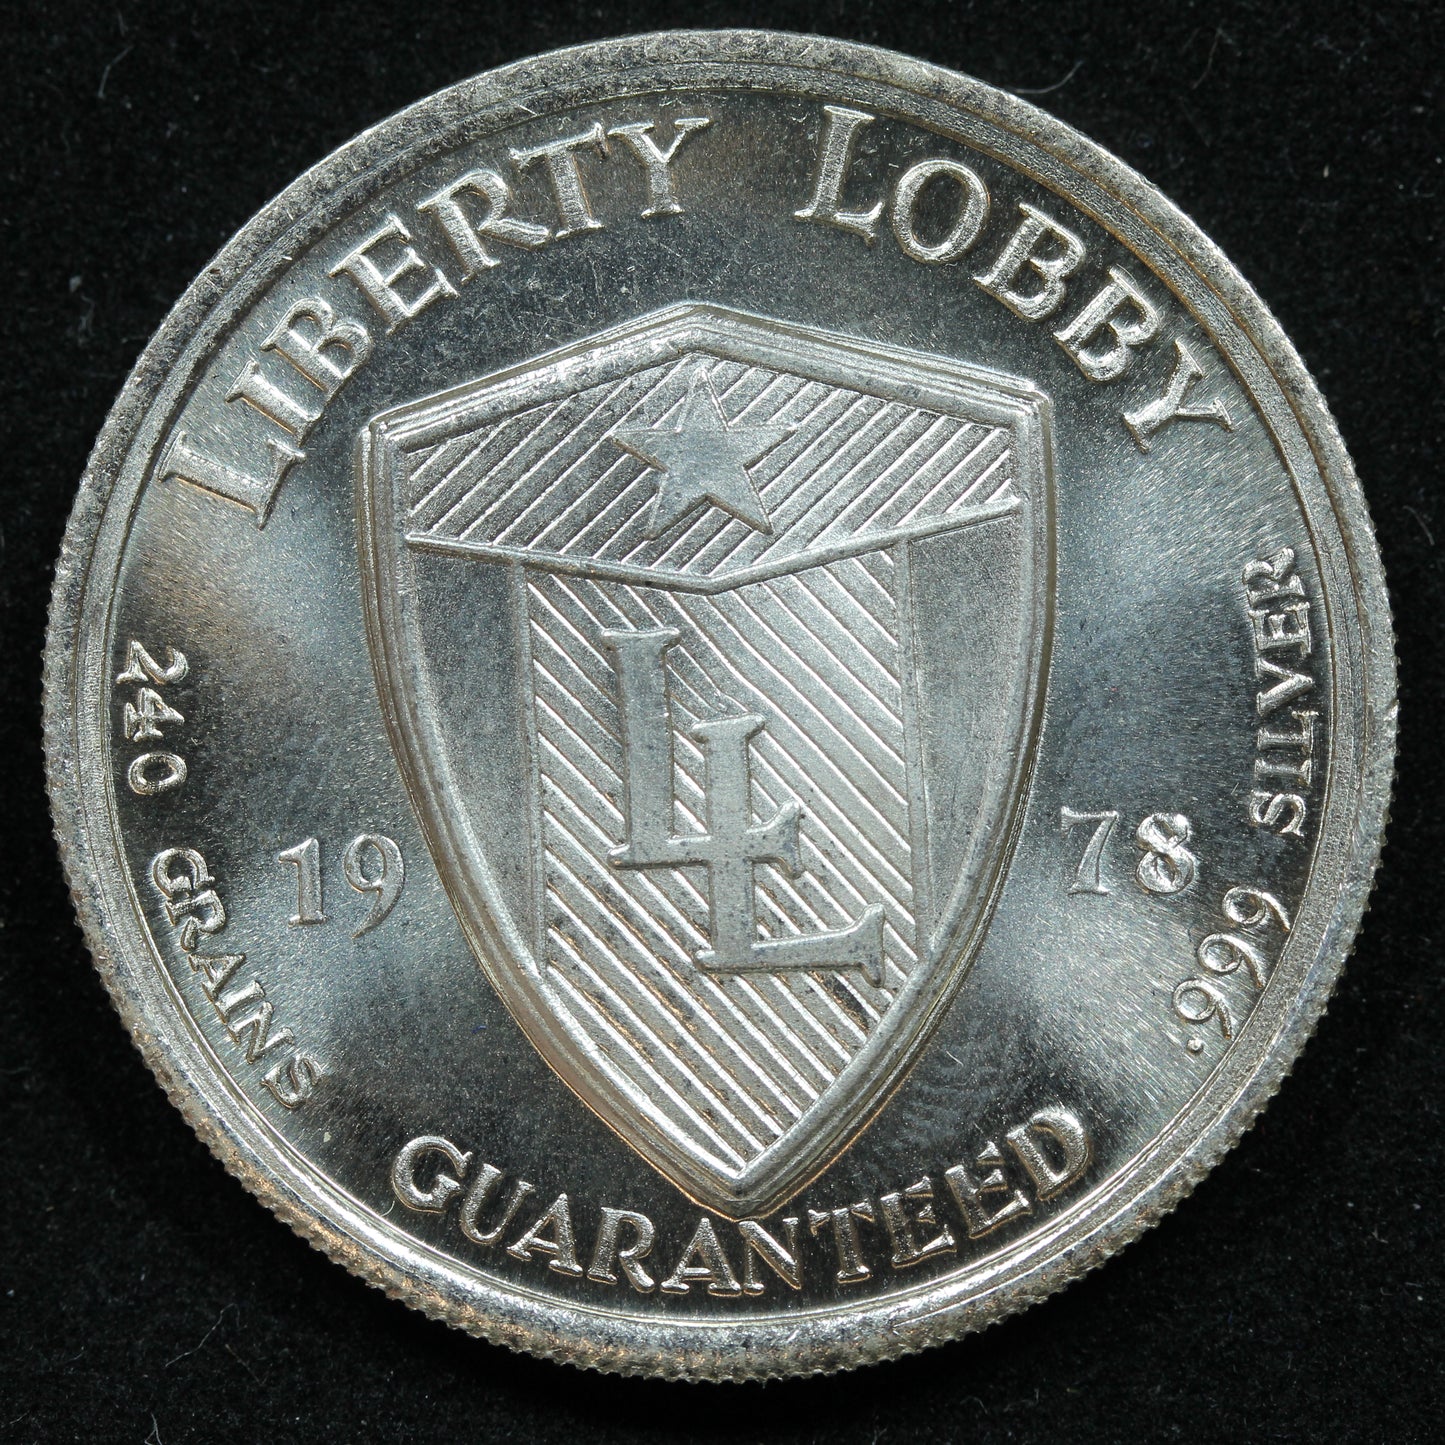 1978 Liberty Lobby 240 grains .999 Silver Medallion Andrew Jackson Courage Medal